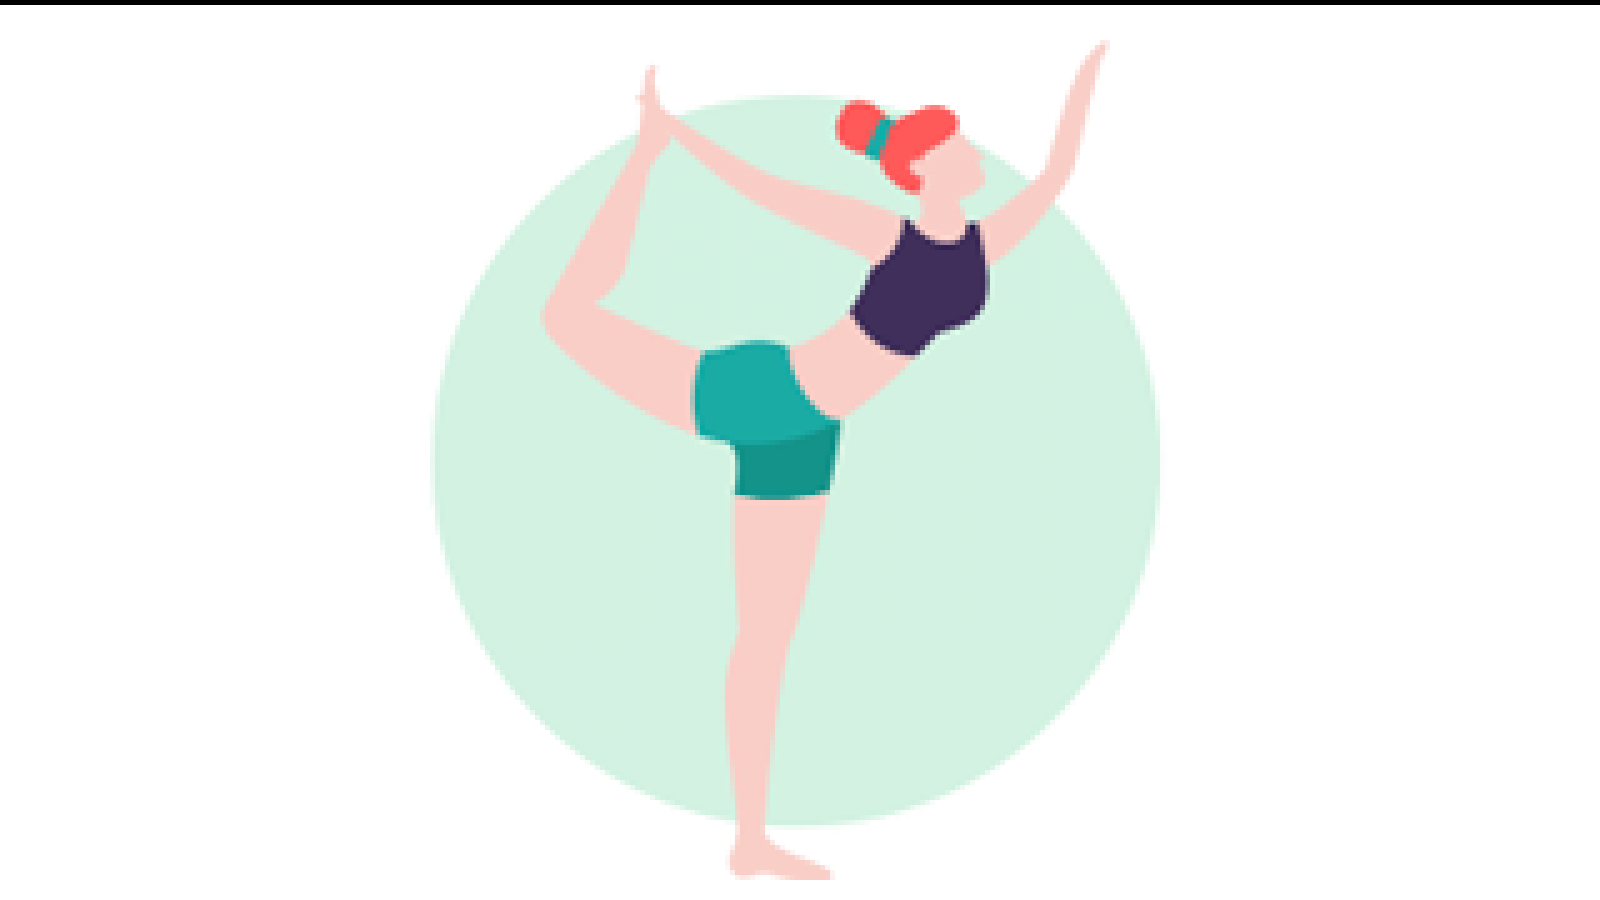 Graphic of a woman with red hair doing a standing yoga pose on one foot.